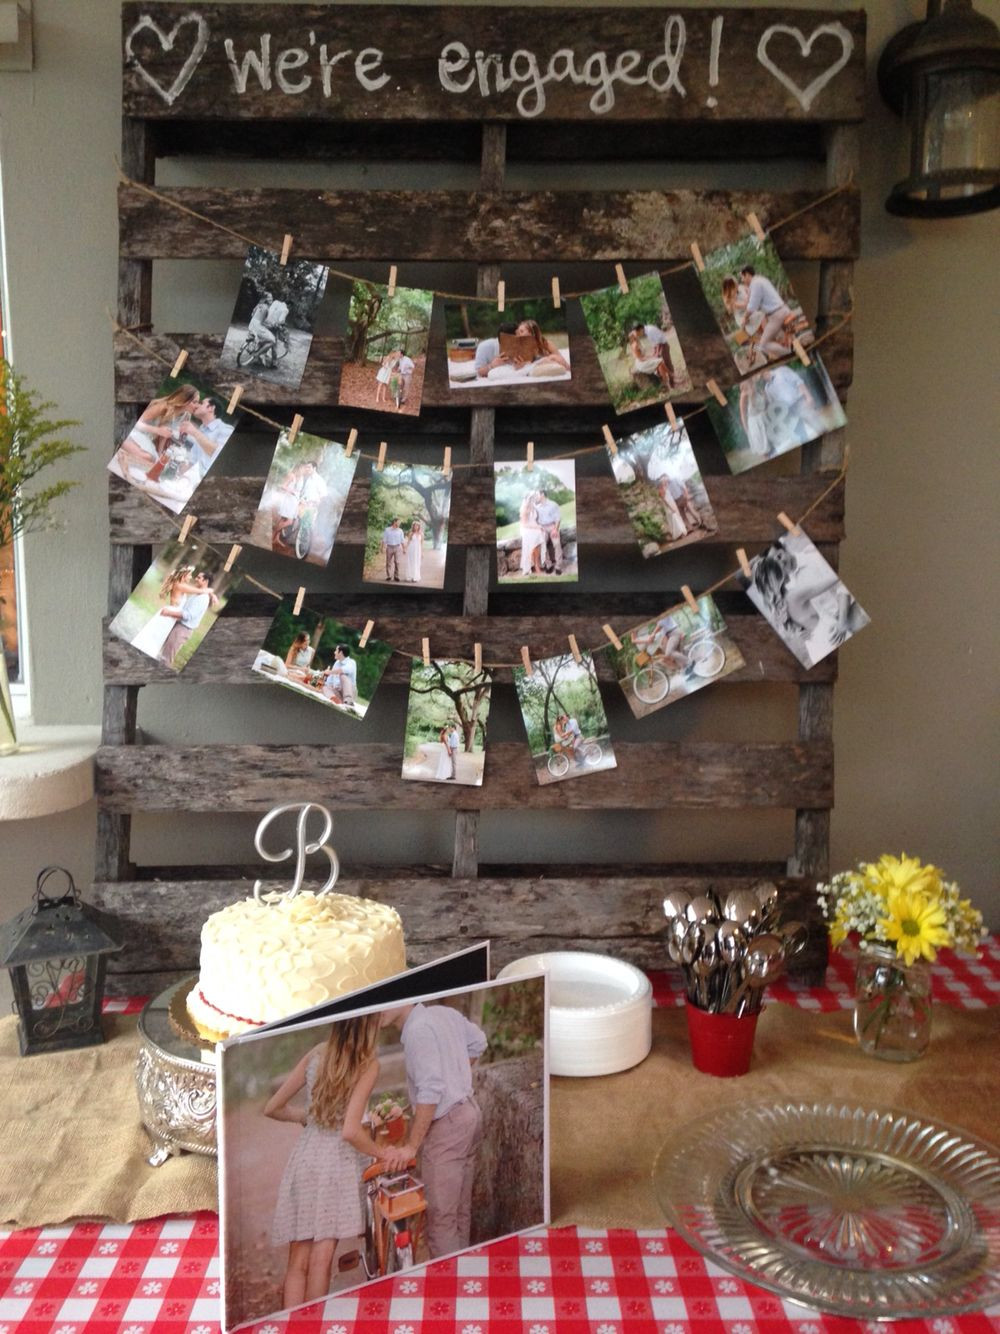 Decor Ideas For Engagement Party
 I do BBQ … Engagement